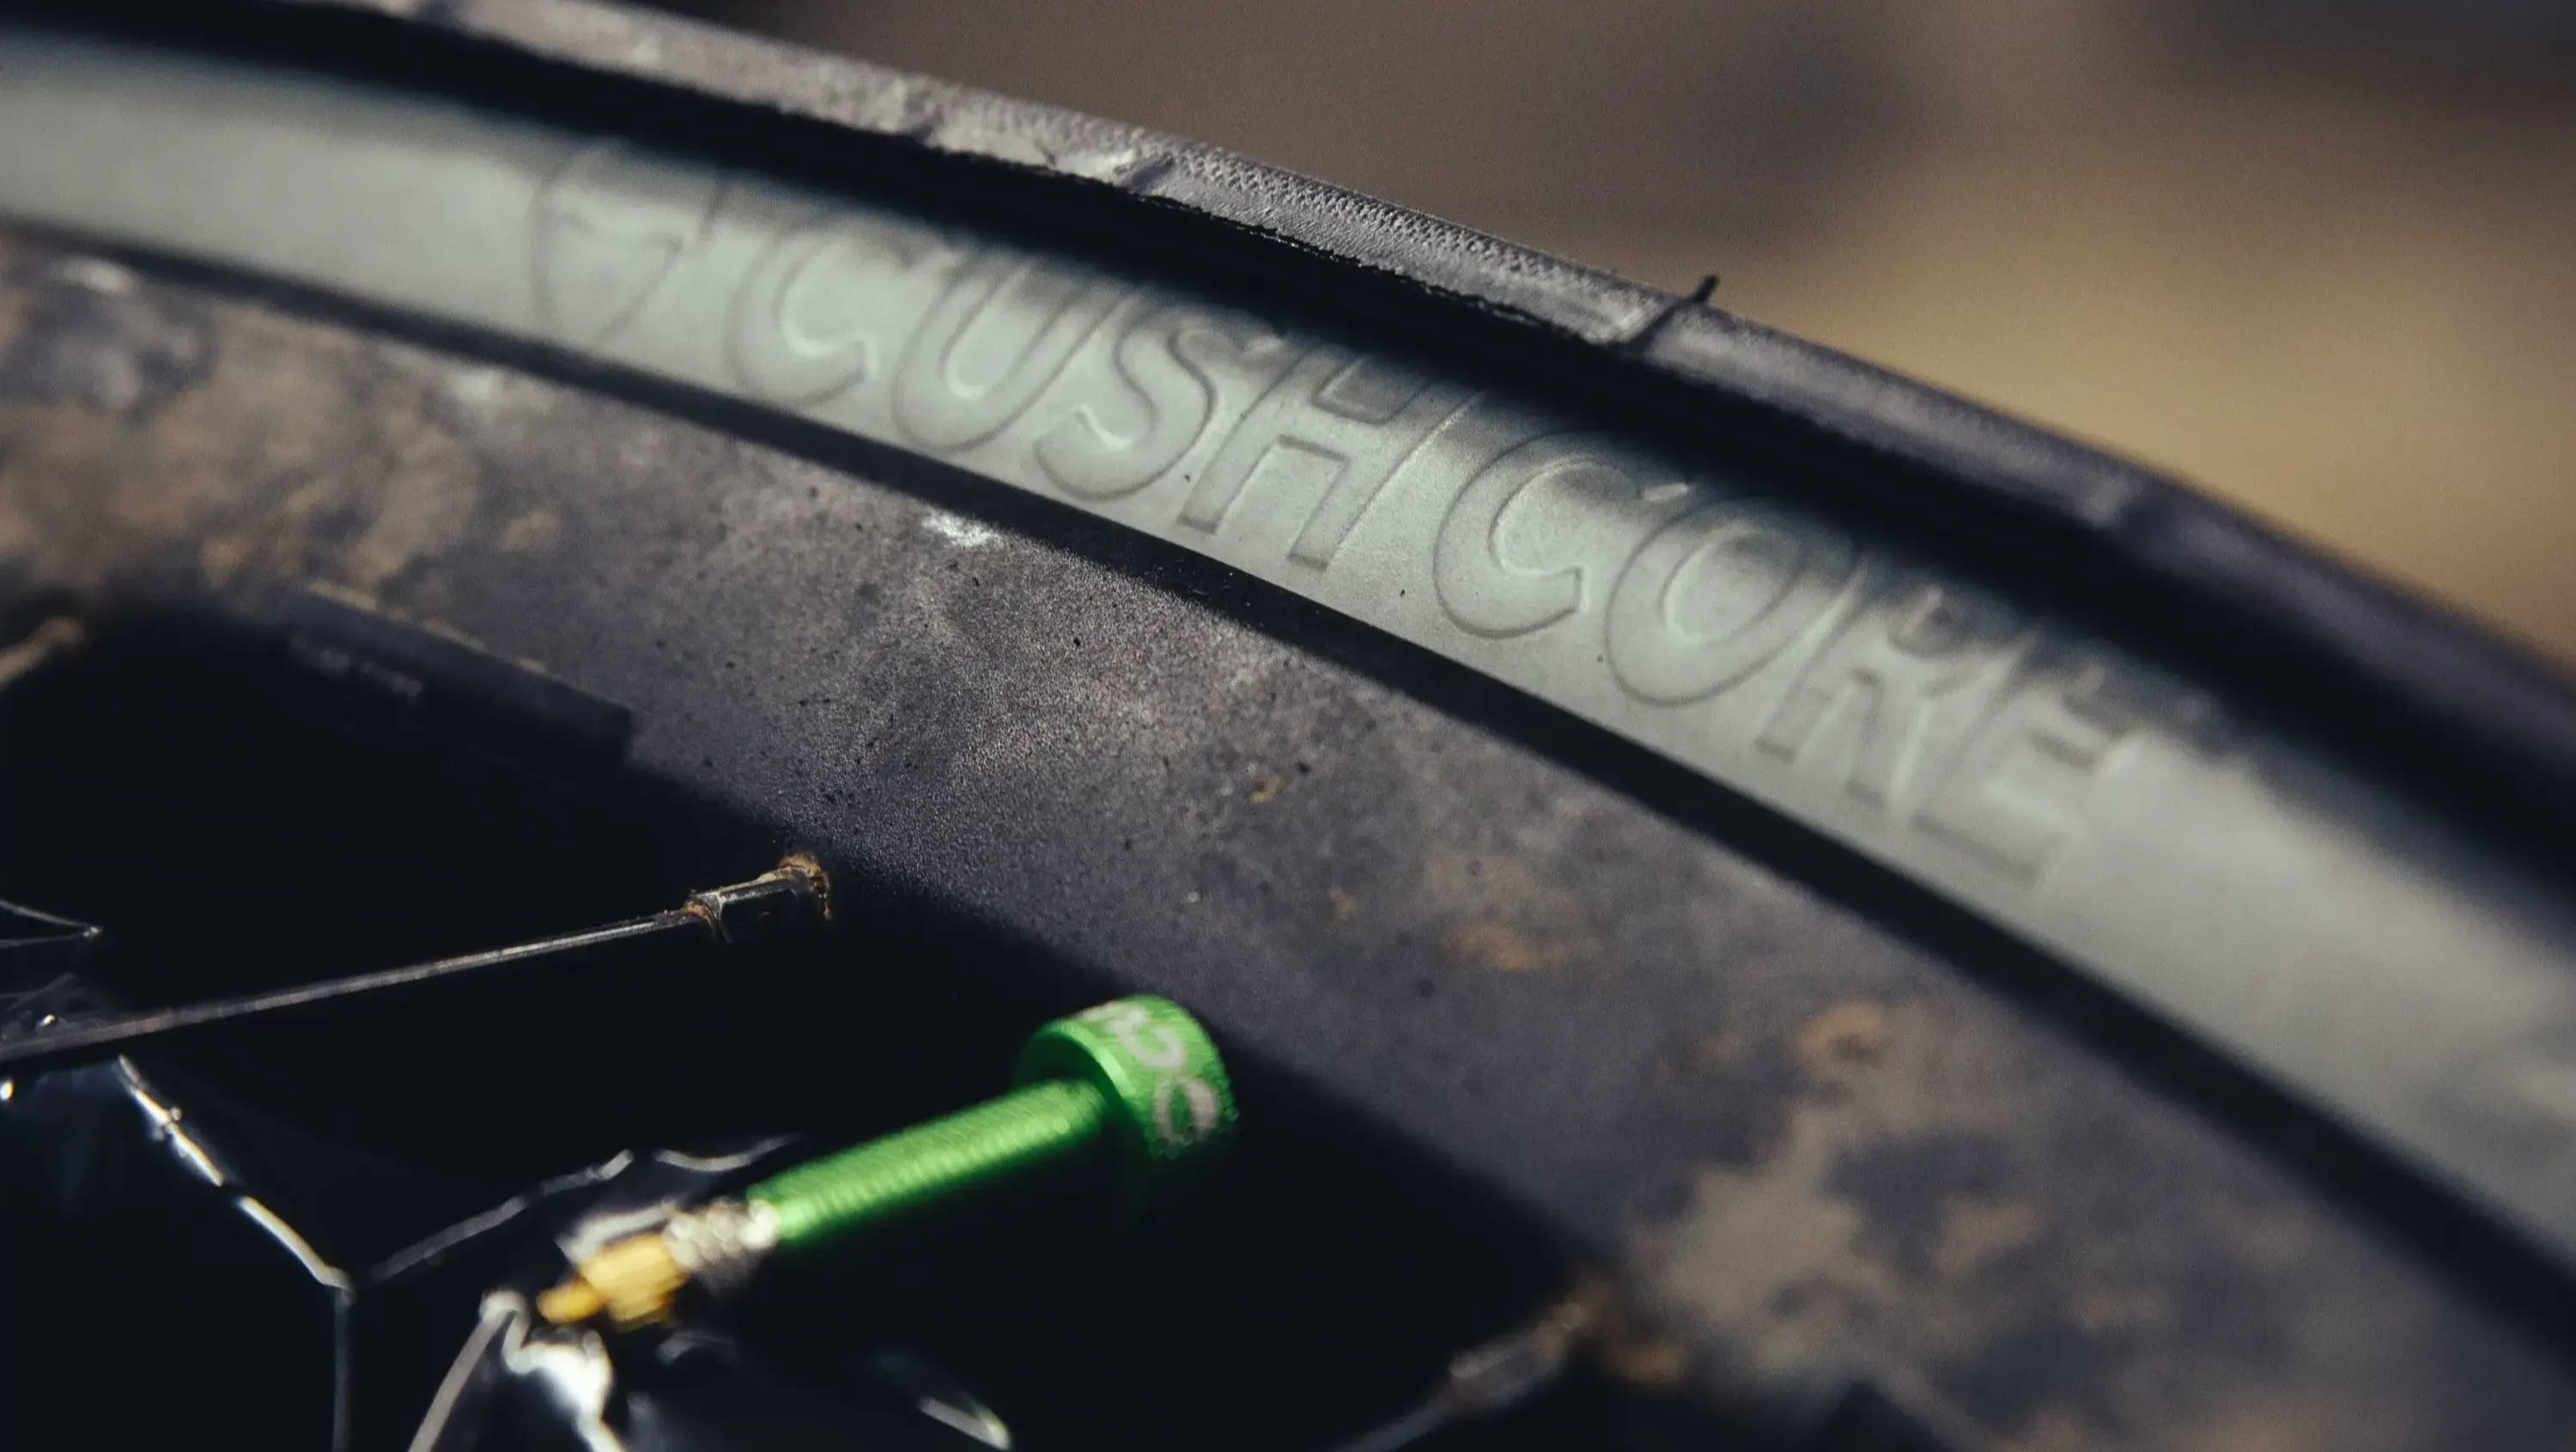 cushcore installed on a mountain bike with green valve stems